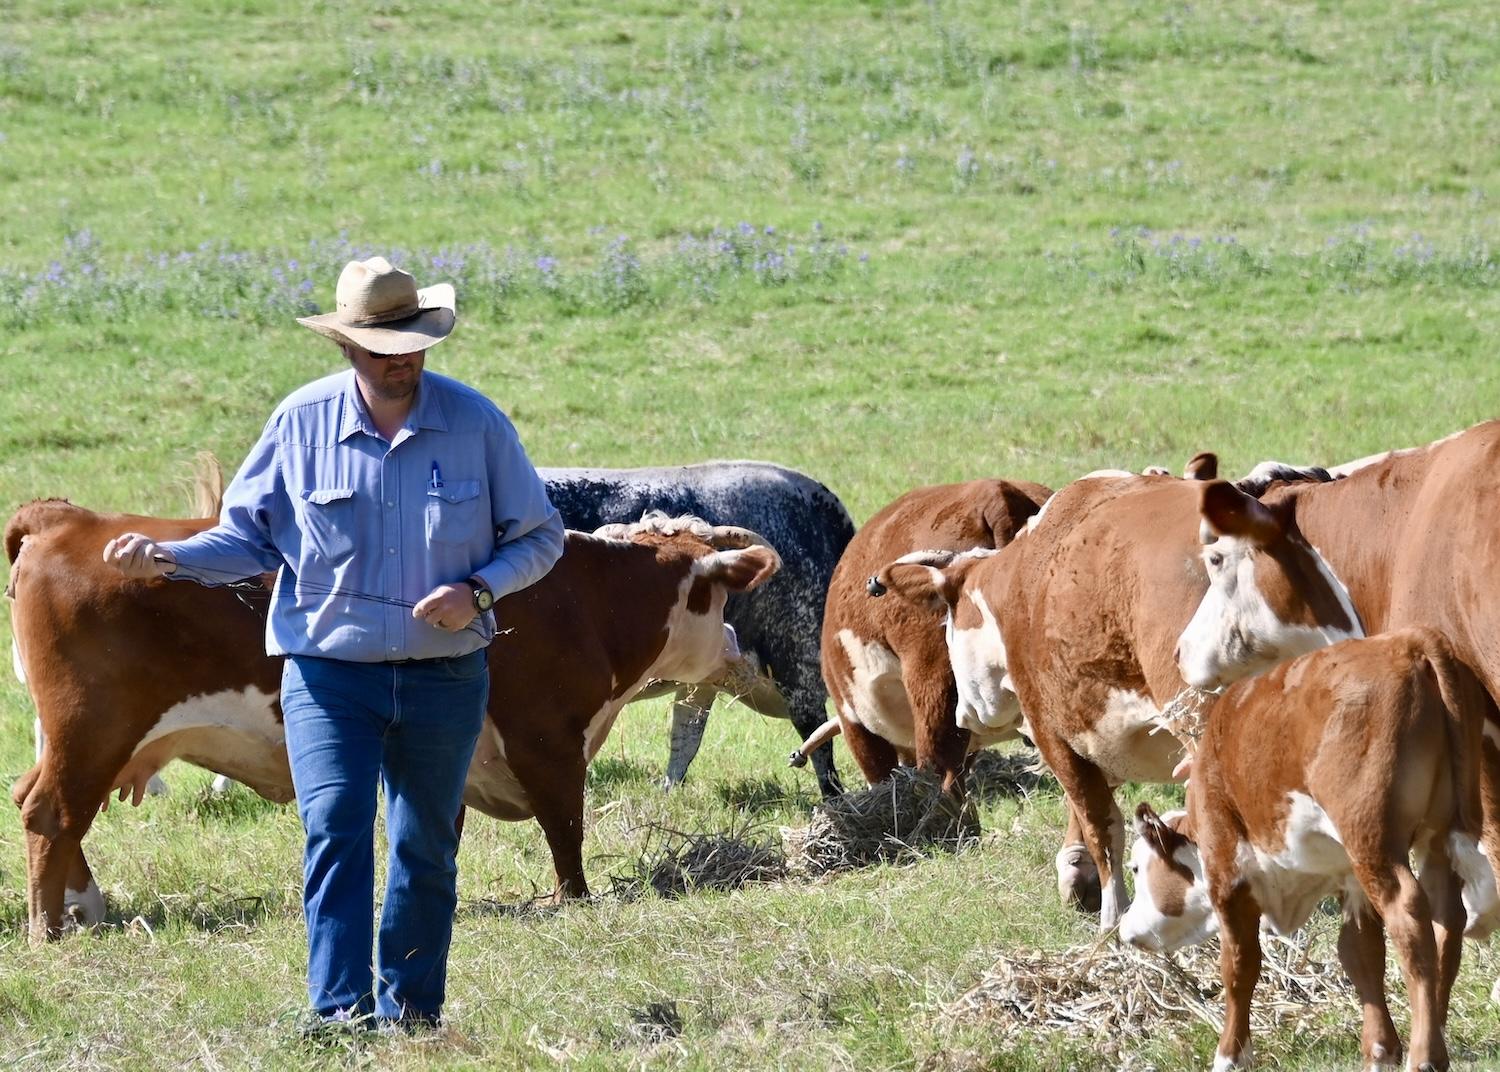 LBJ Ranch foreman Clint Herriman inspects the cattle.